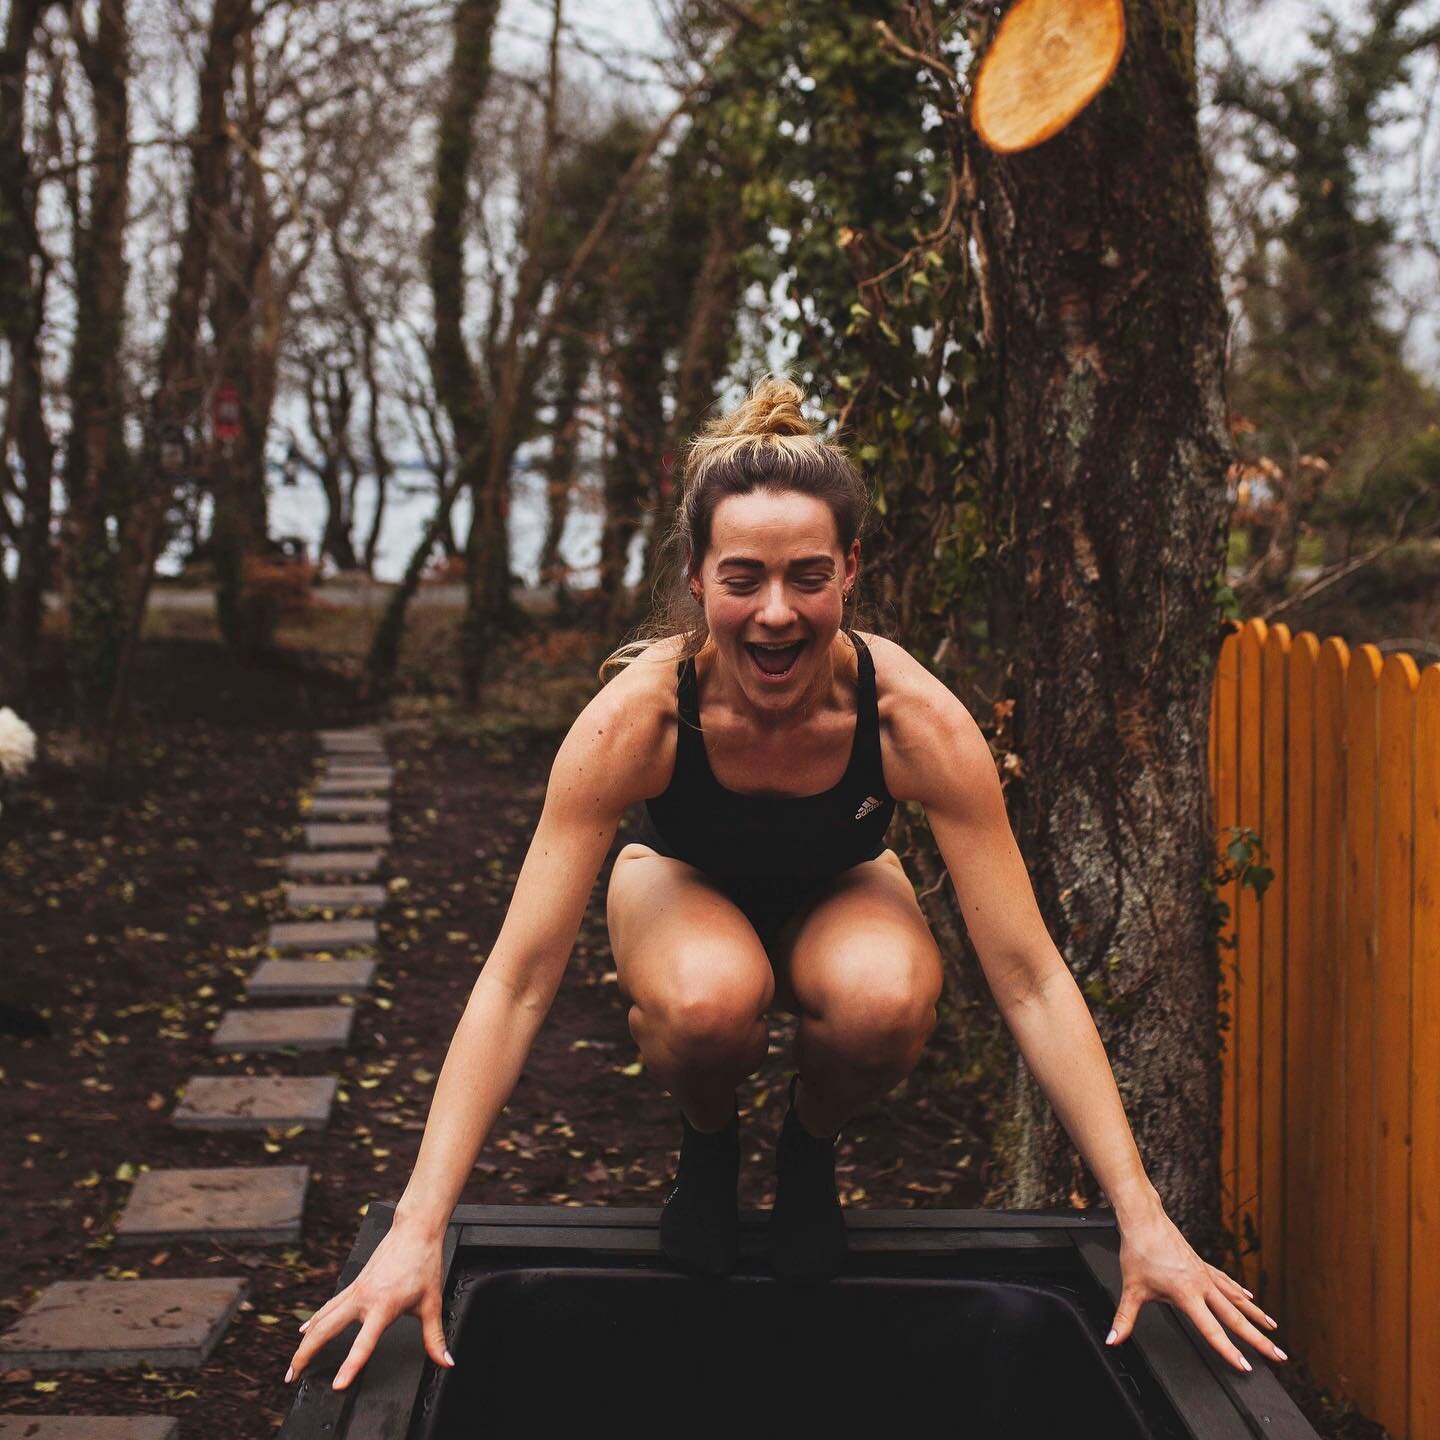 Three degrees of the plunge pool! 

#plungepool #icebath #coldplunge  #thesaunasociety #loughennell #recovery #coldtherapy #irelandhiddenheartlands #visitwestmeath